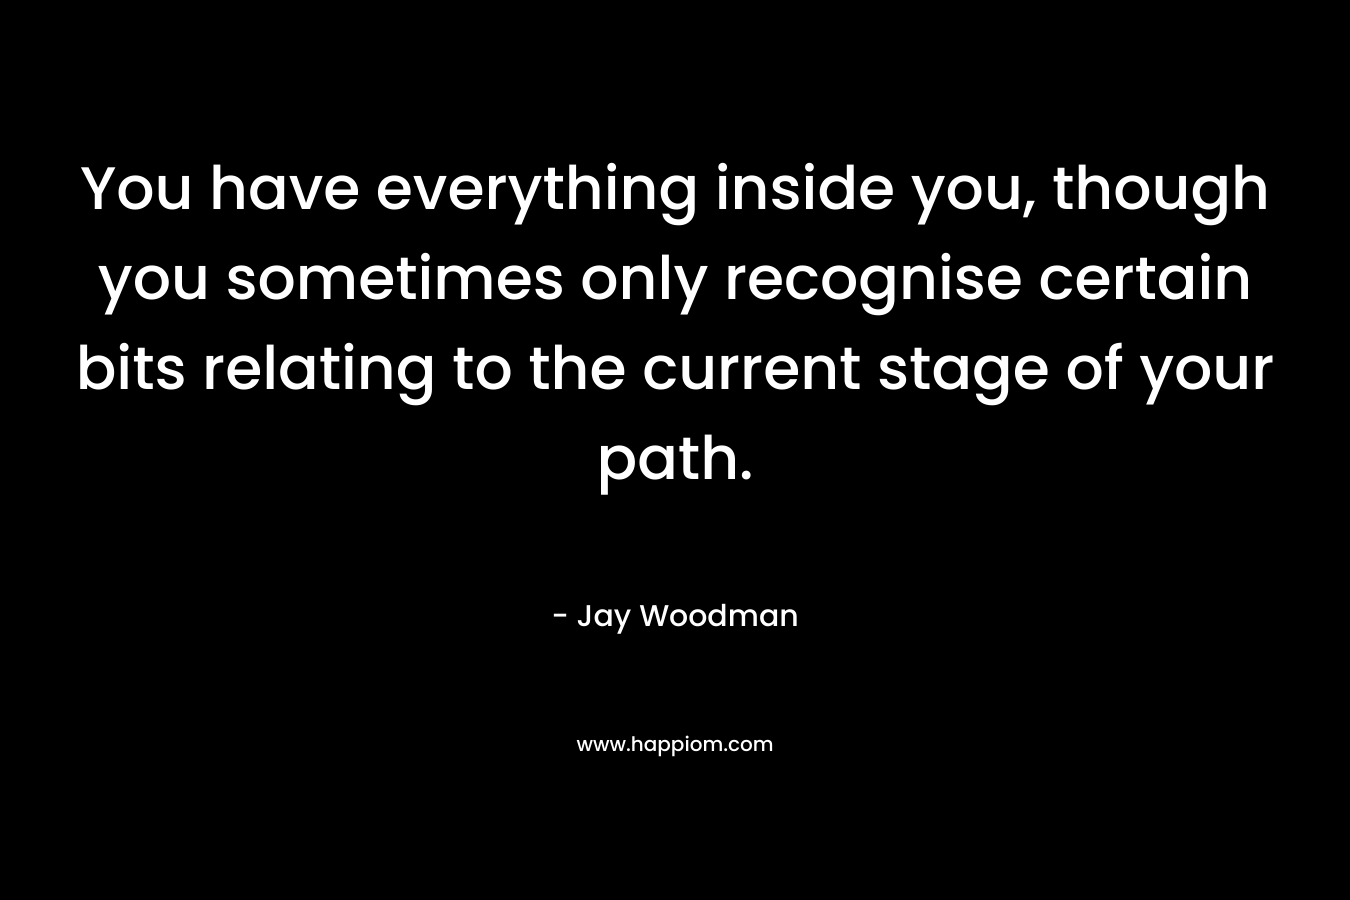 You have everything inside you, though you sometimes only recognise certain bits relating to the current stage of your path. – Jay Woodman